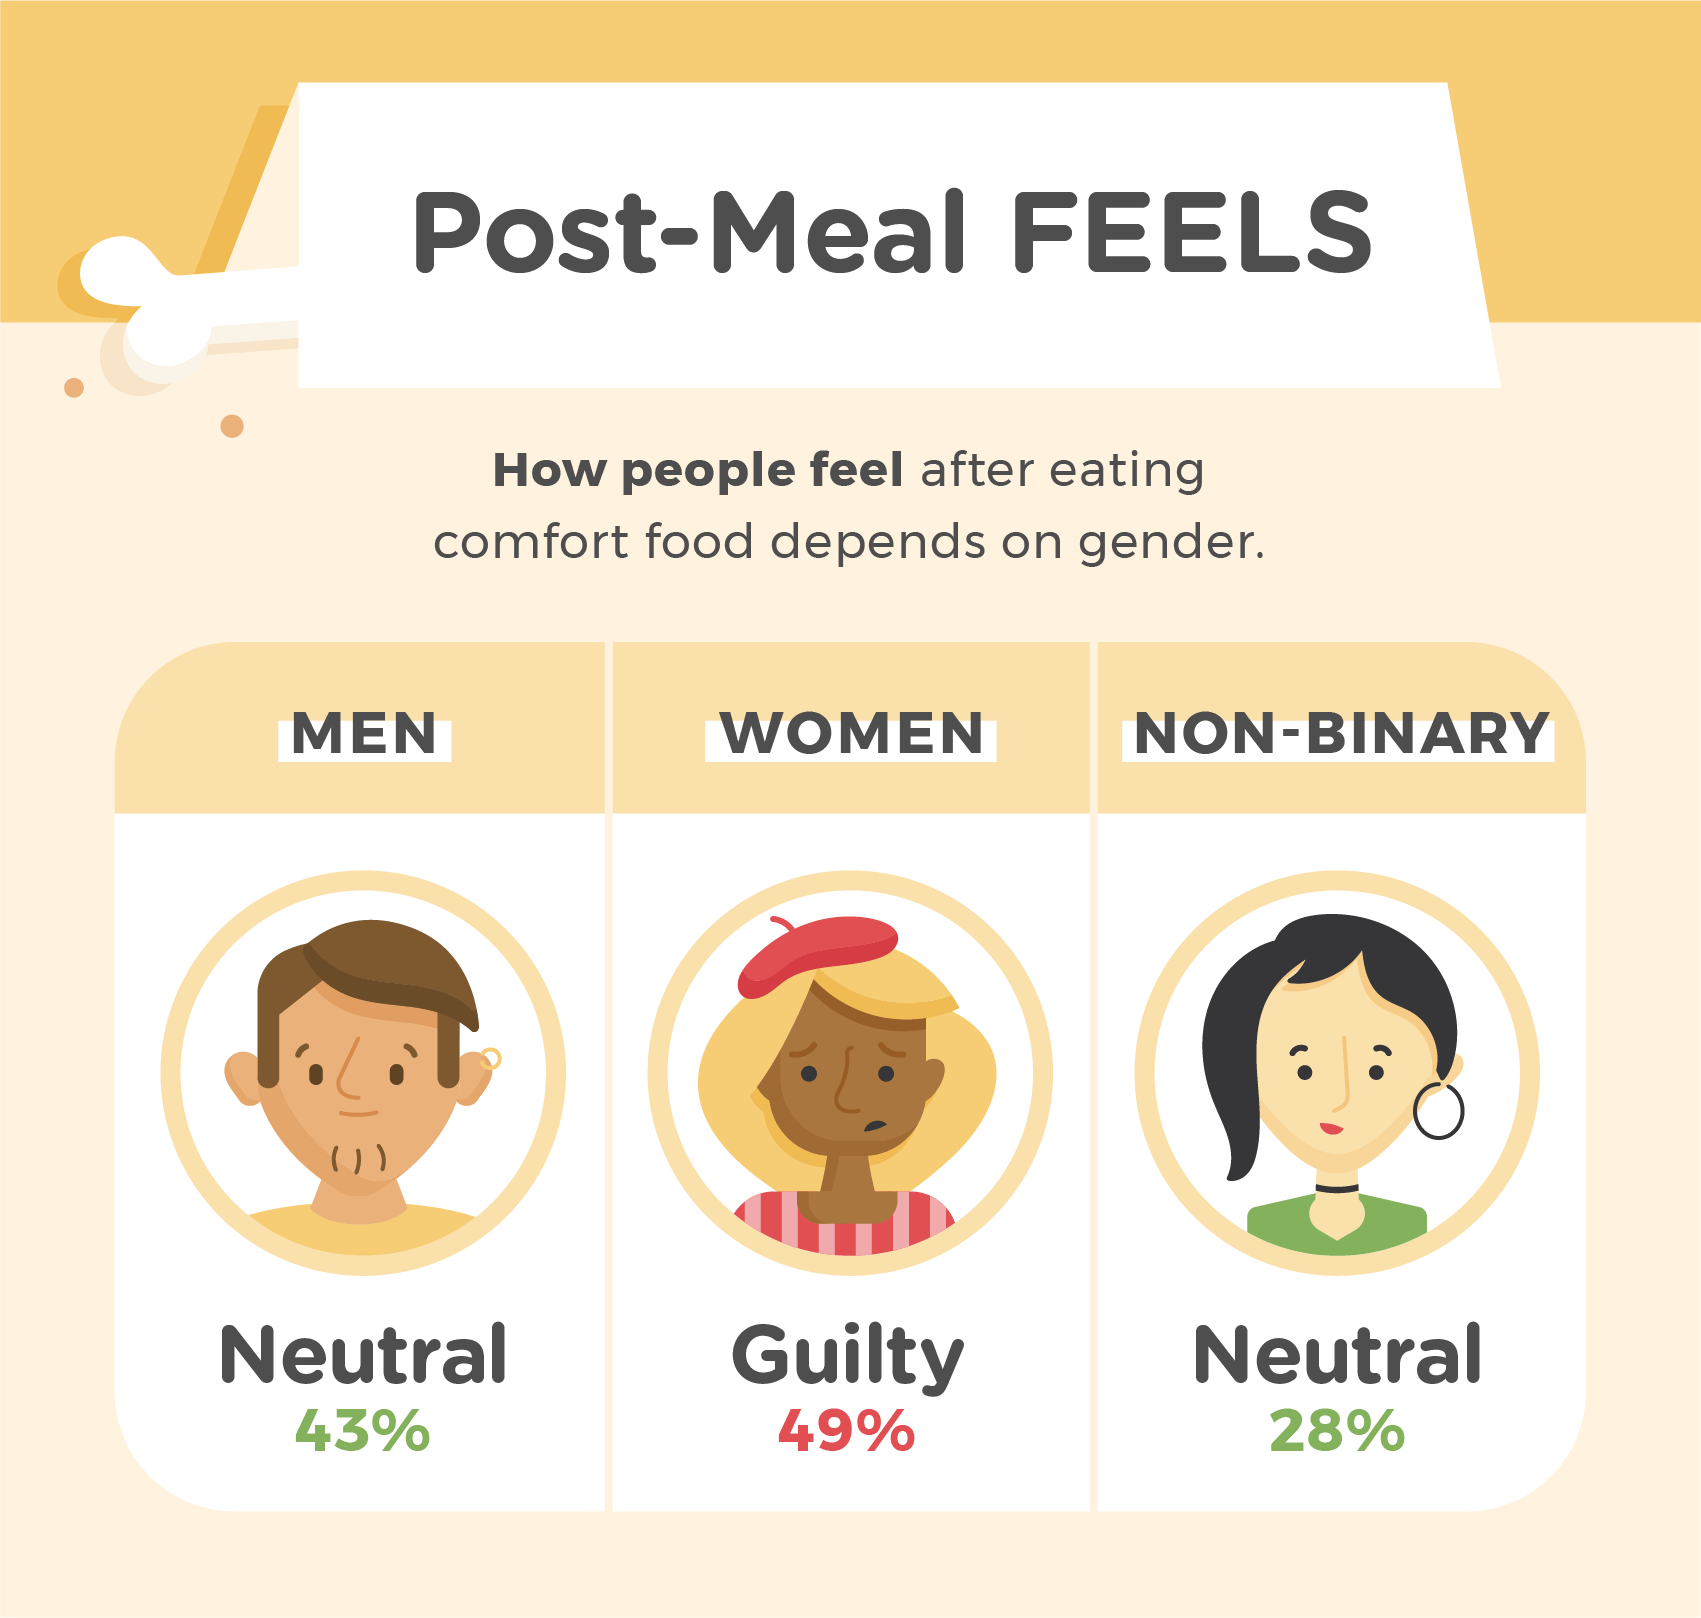 Three illustrations depicting different genders and data about how they feel after eating.